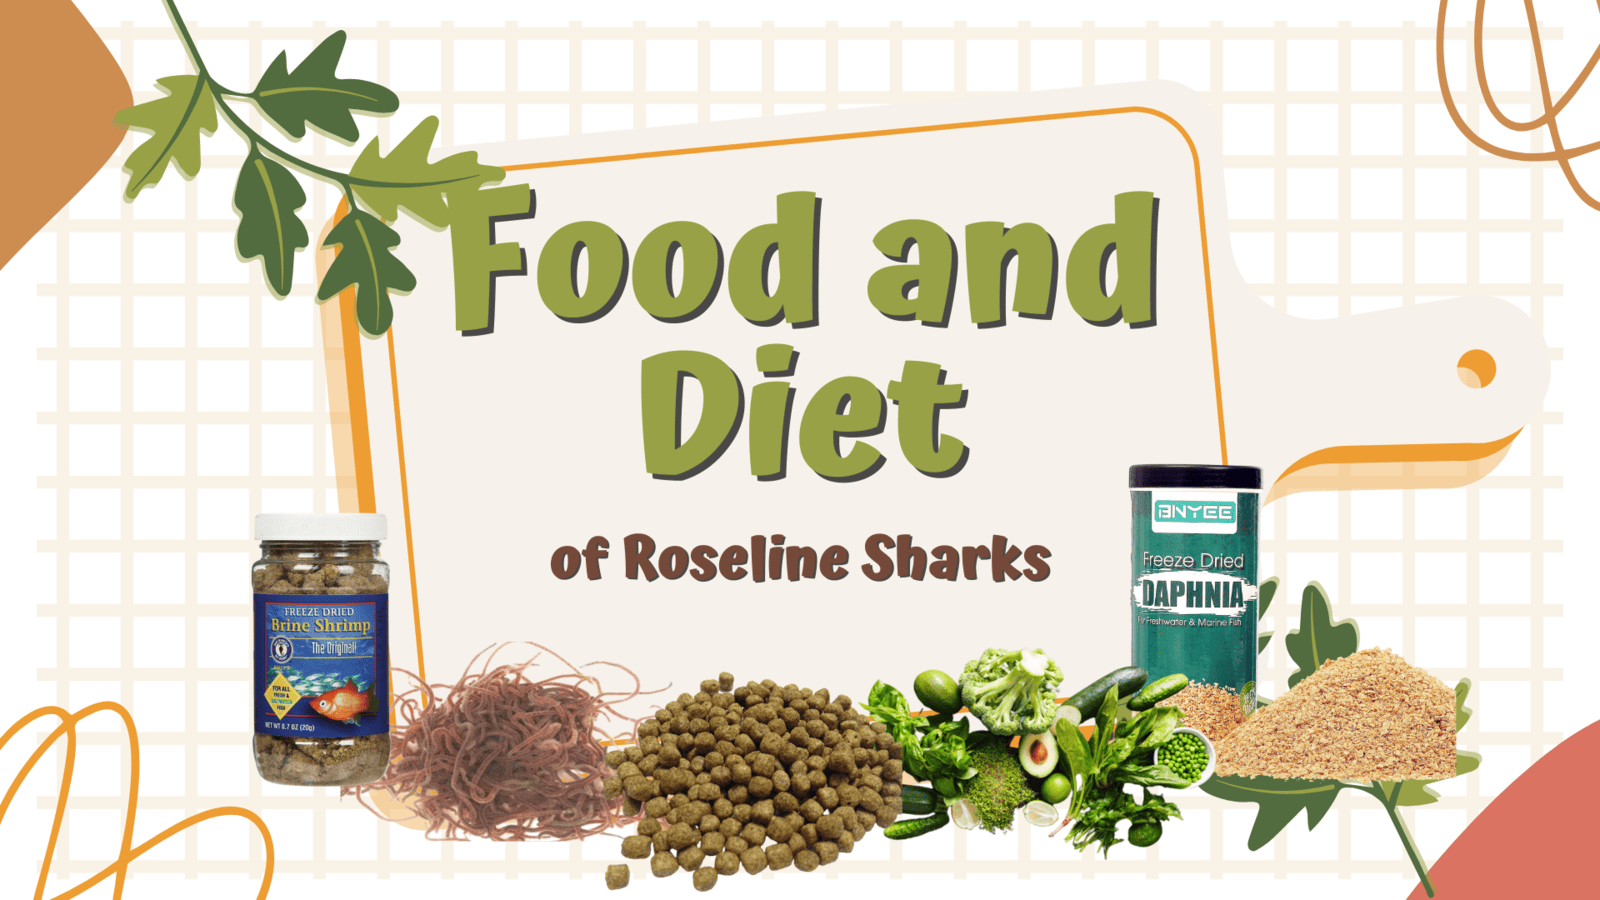 Roseline Sharks Food and Diet